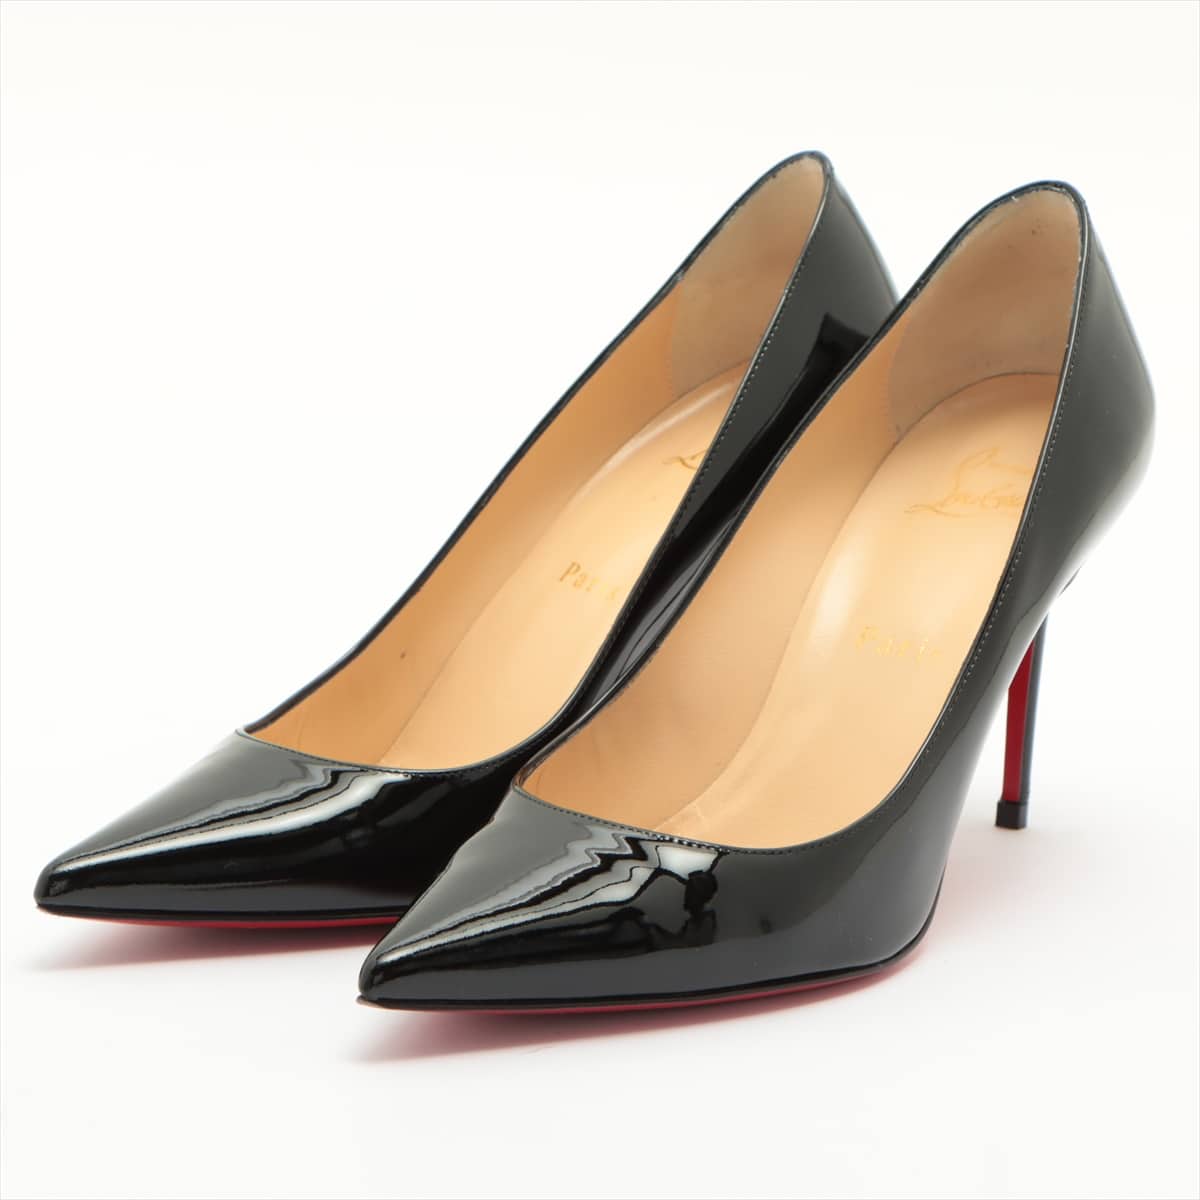 Christian Louboutin Patent leather Pumps 37 1/2 Ladies' Black Pointed toe DECOLLETE